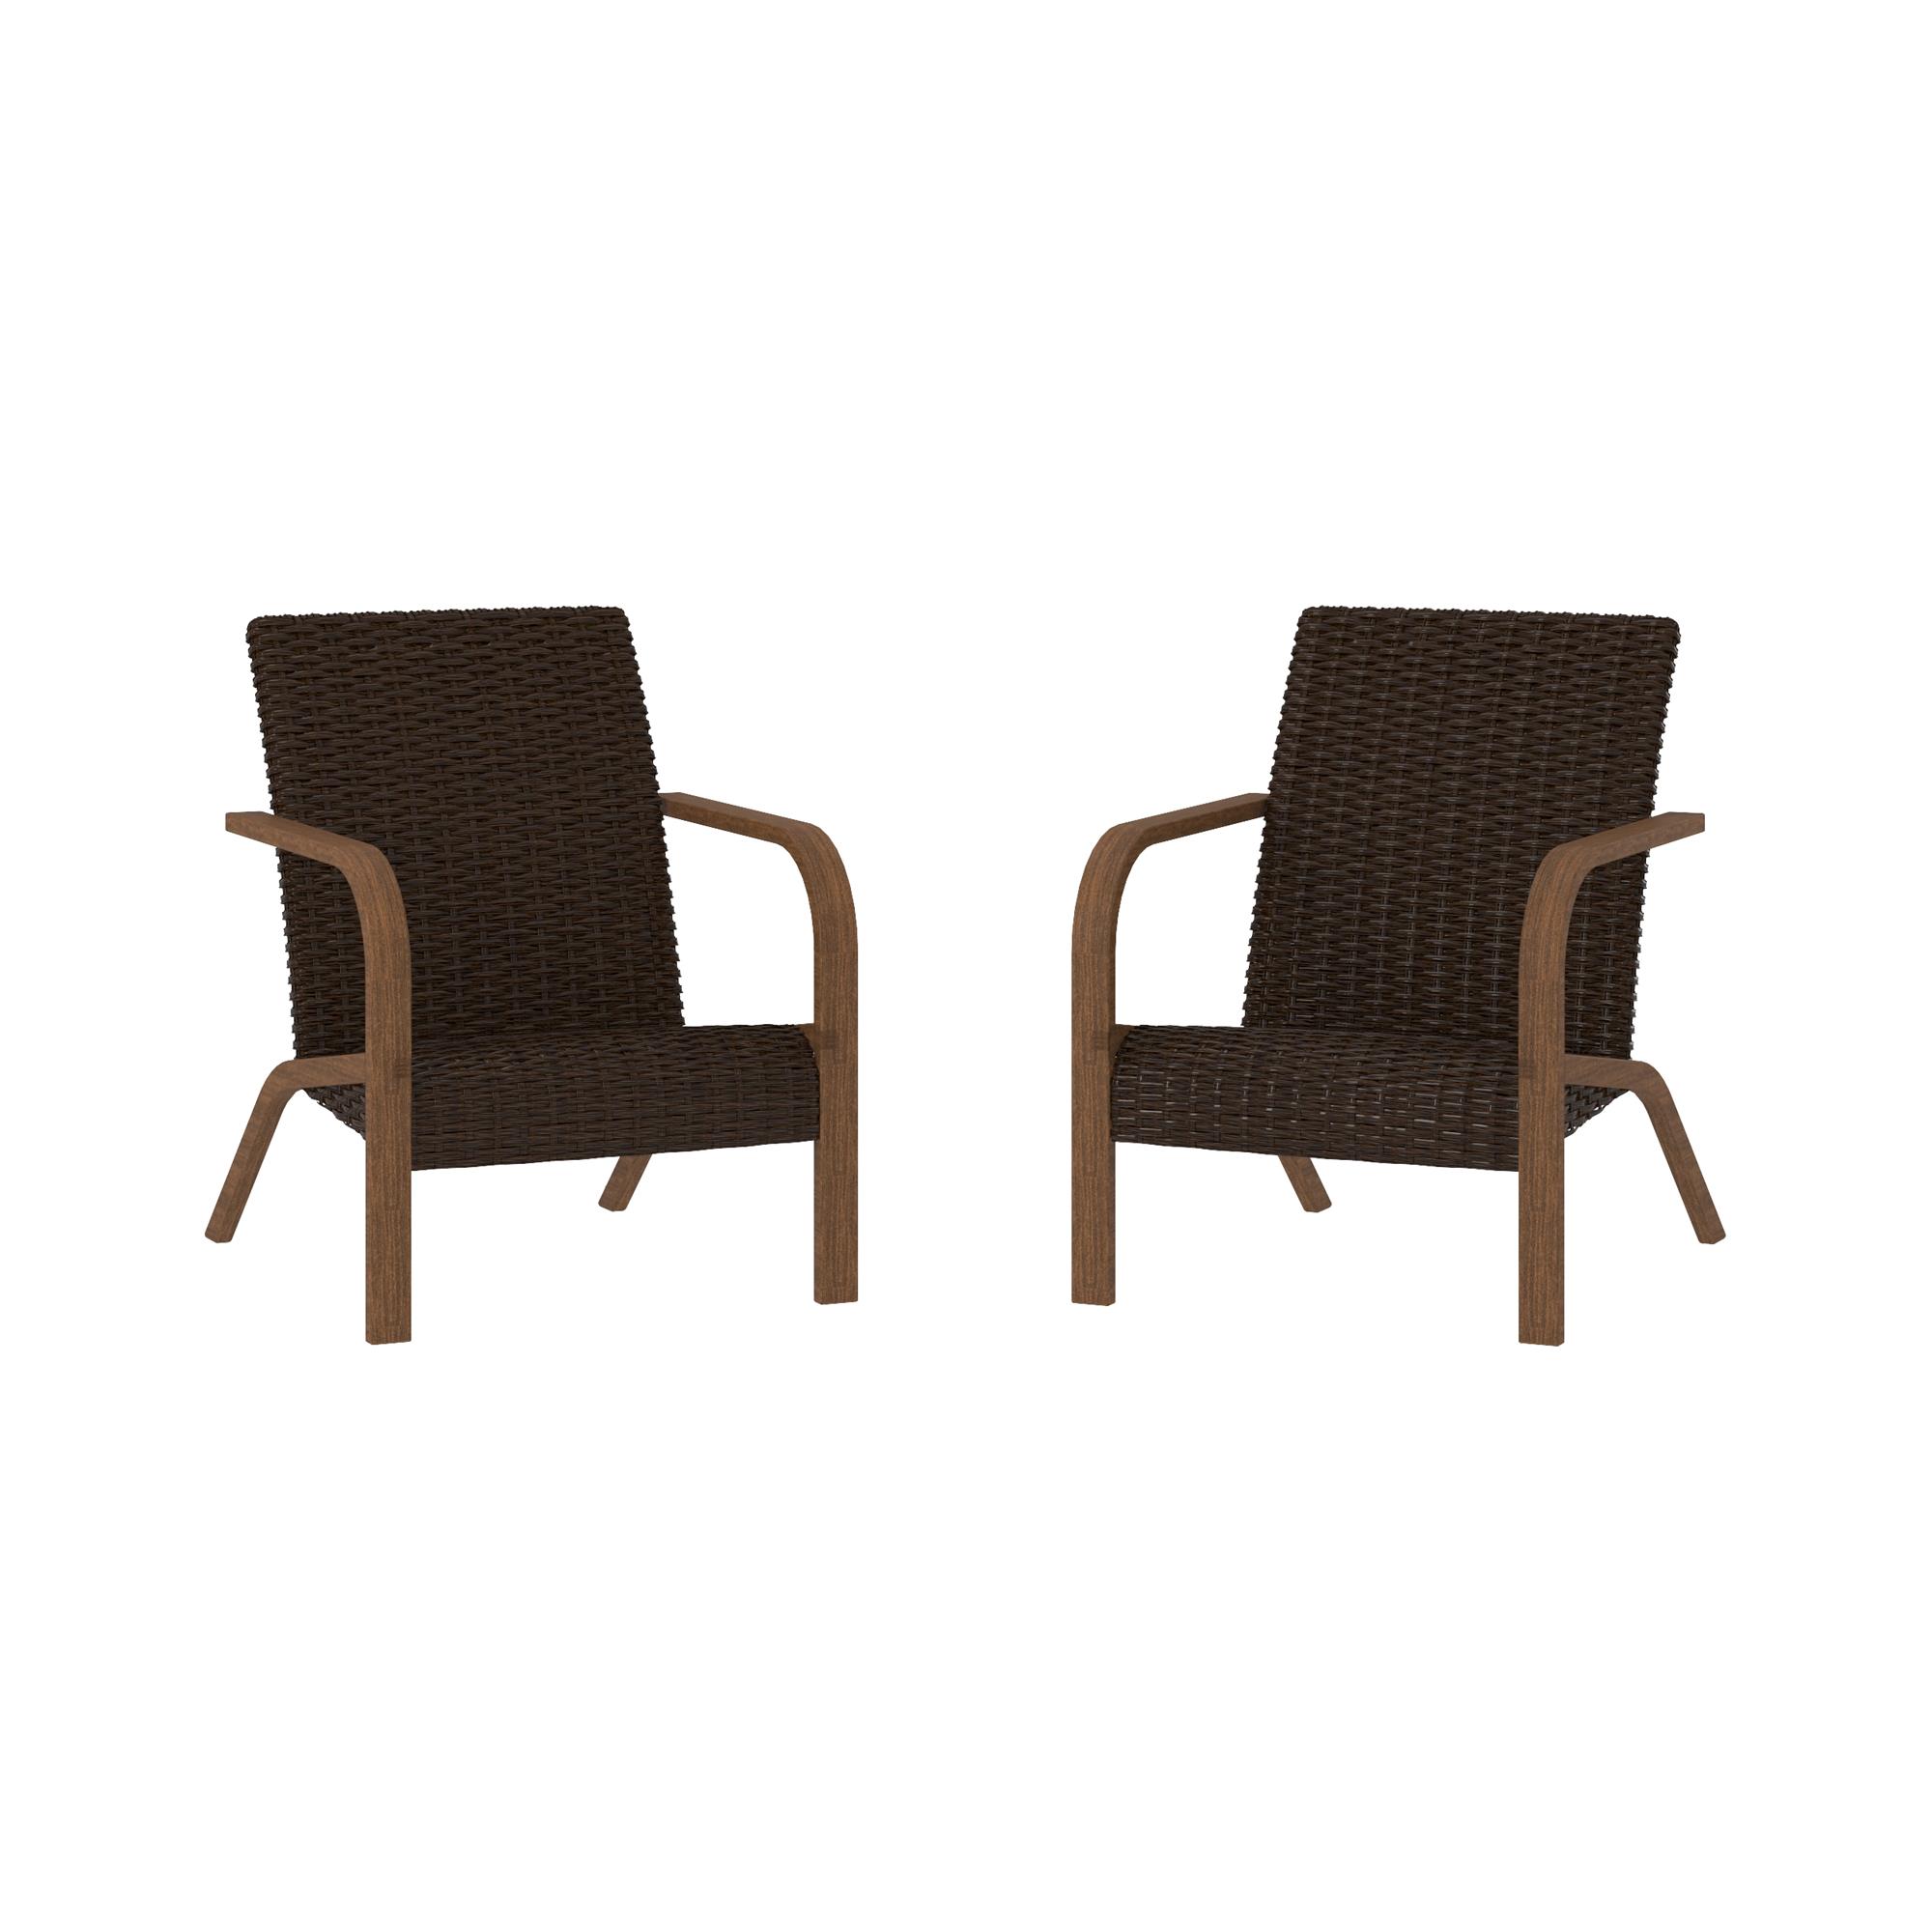 COSCO Outdoor Living, SmartWick, Patio Lounge Chairs, 2-Pack, Dark Brown - image 5 of 8